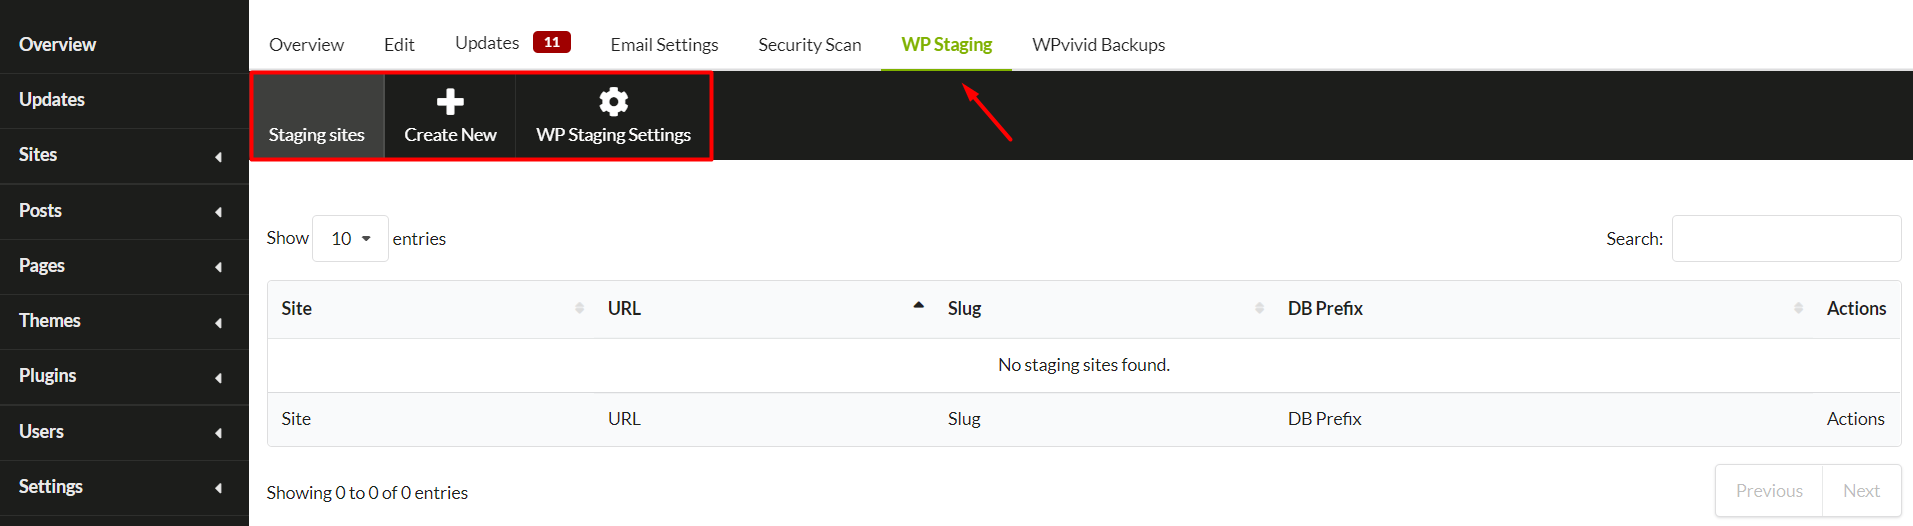 WP Staging Options